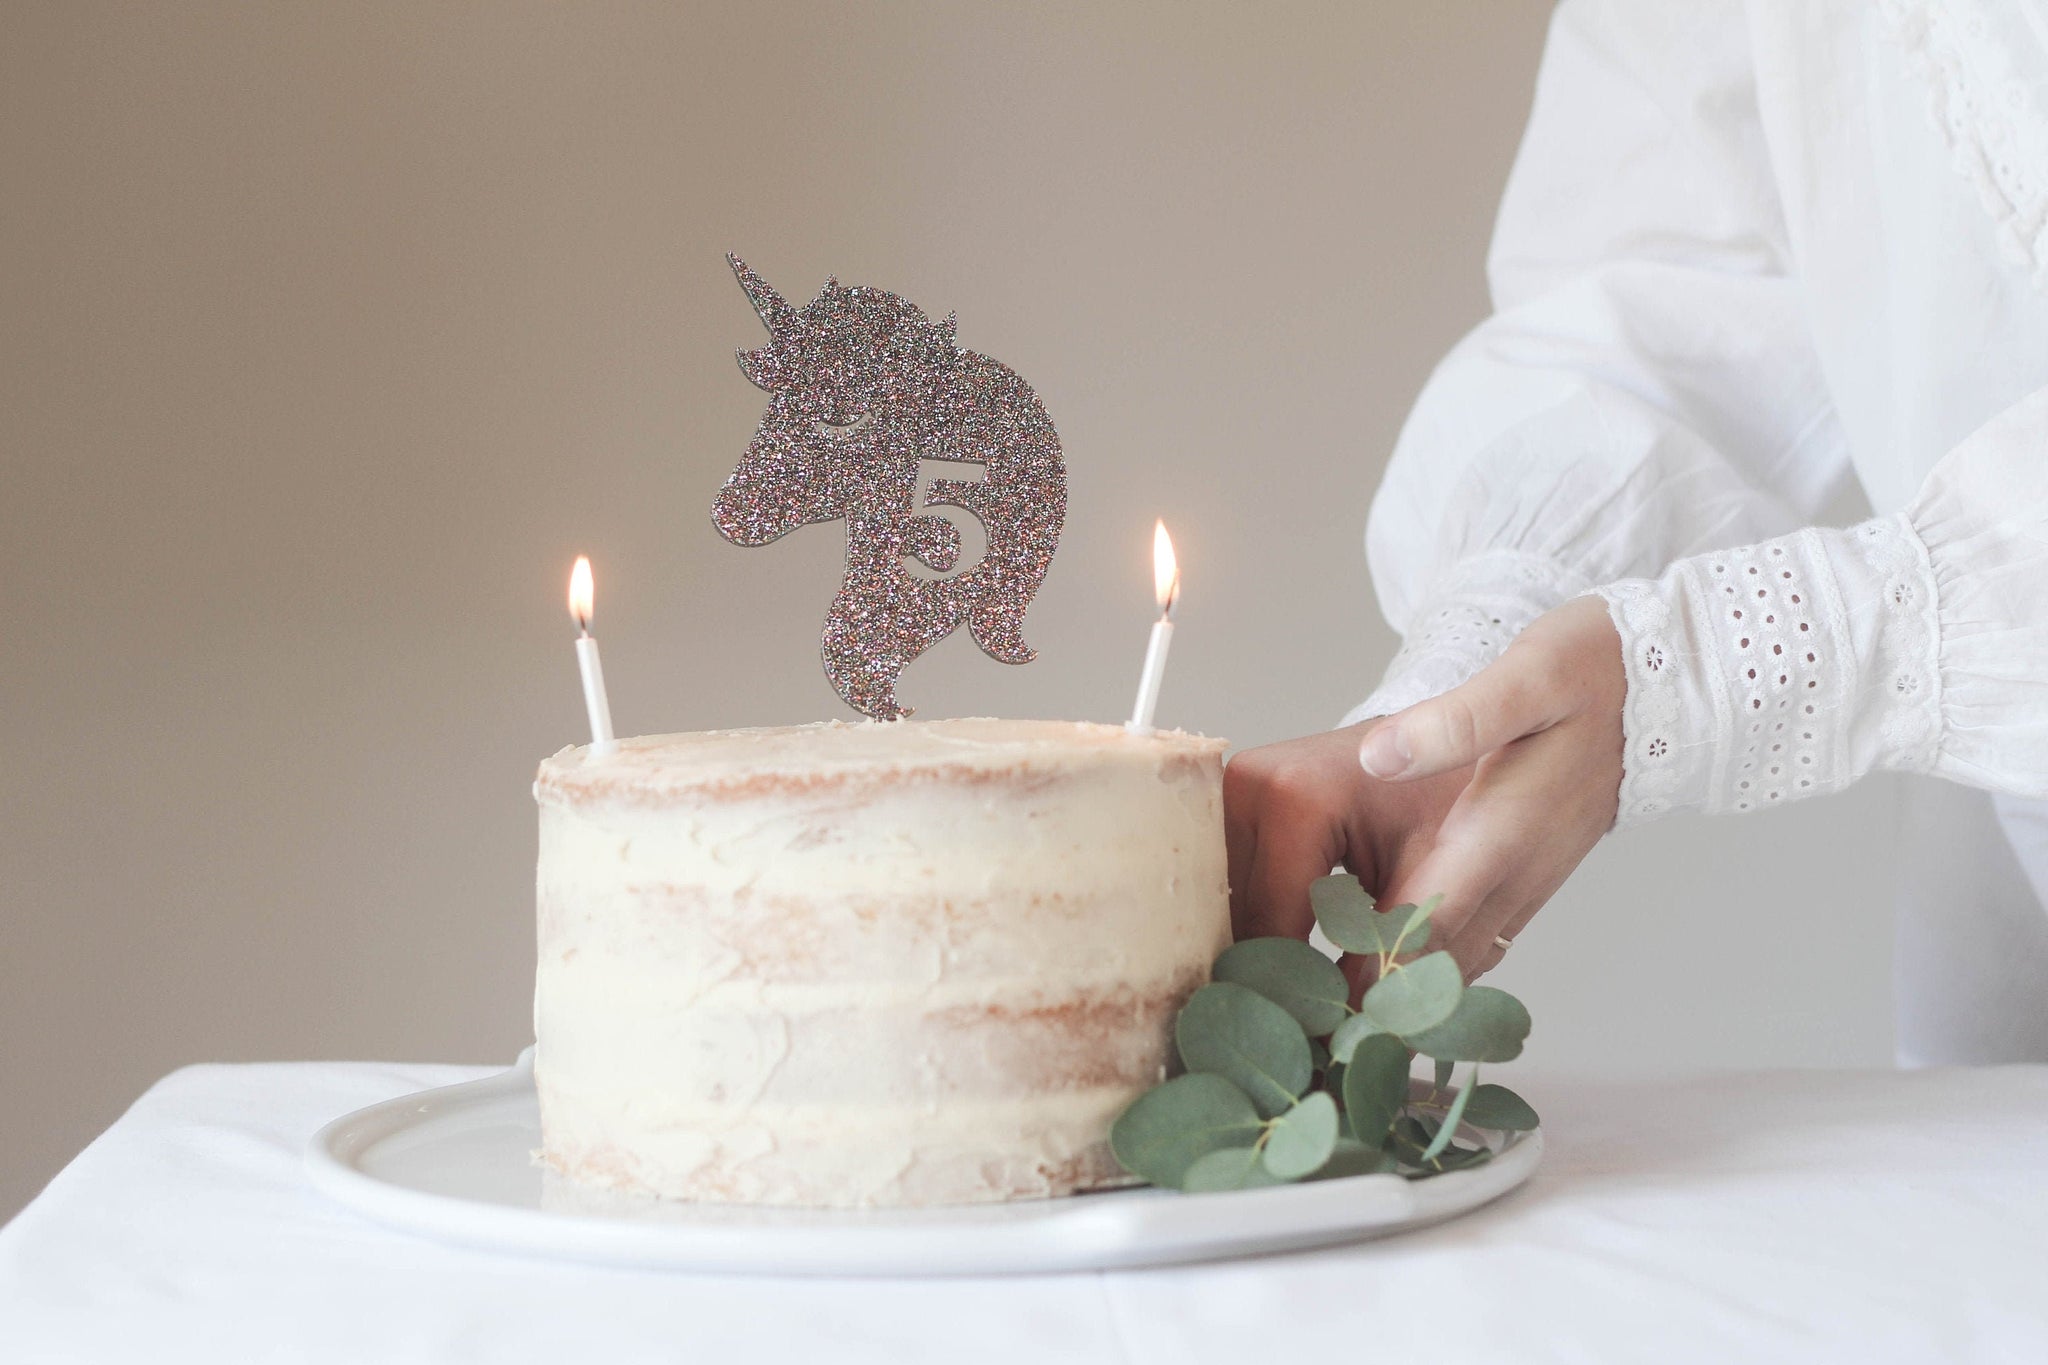 Glitter Unicorn Cake Topper Perfect For A Sparkly And Magical Unicorn Themed Birthday Party, Happy Birthday Cake Topper